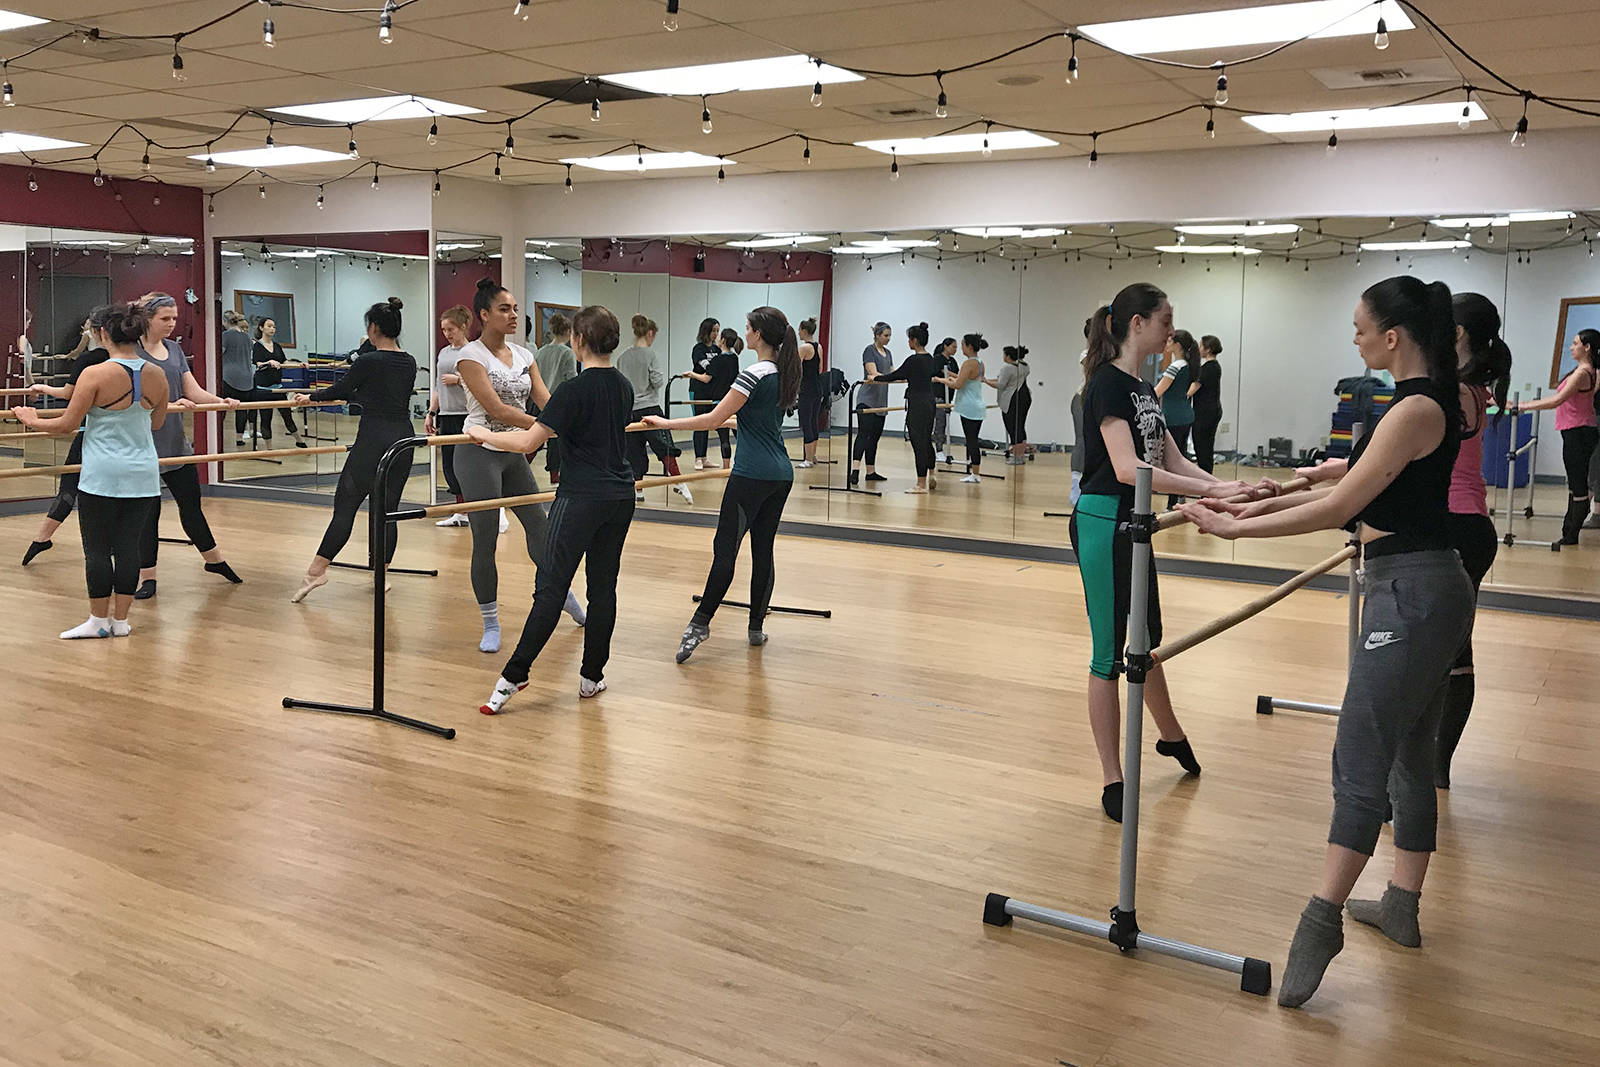 A true neighborhood studio, Crescendo Dance Academy offers classes for children, youth and adults, in addition to a competitive dance program and an Artist in Residence program.